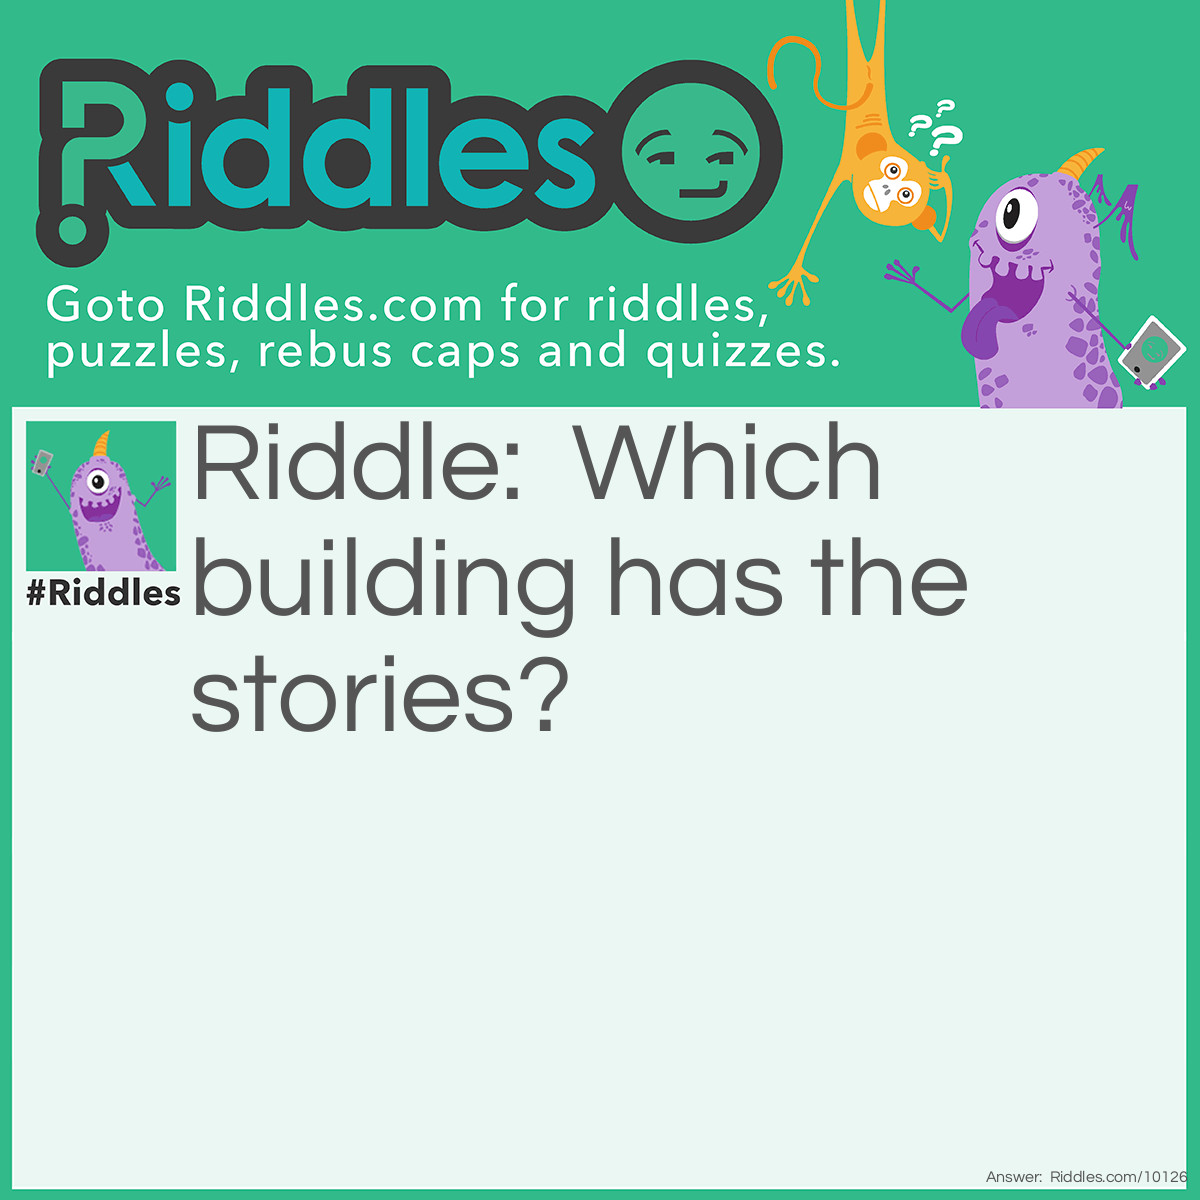 Riddle: Which building has the stories? Answer: A library.